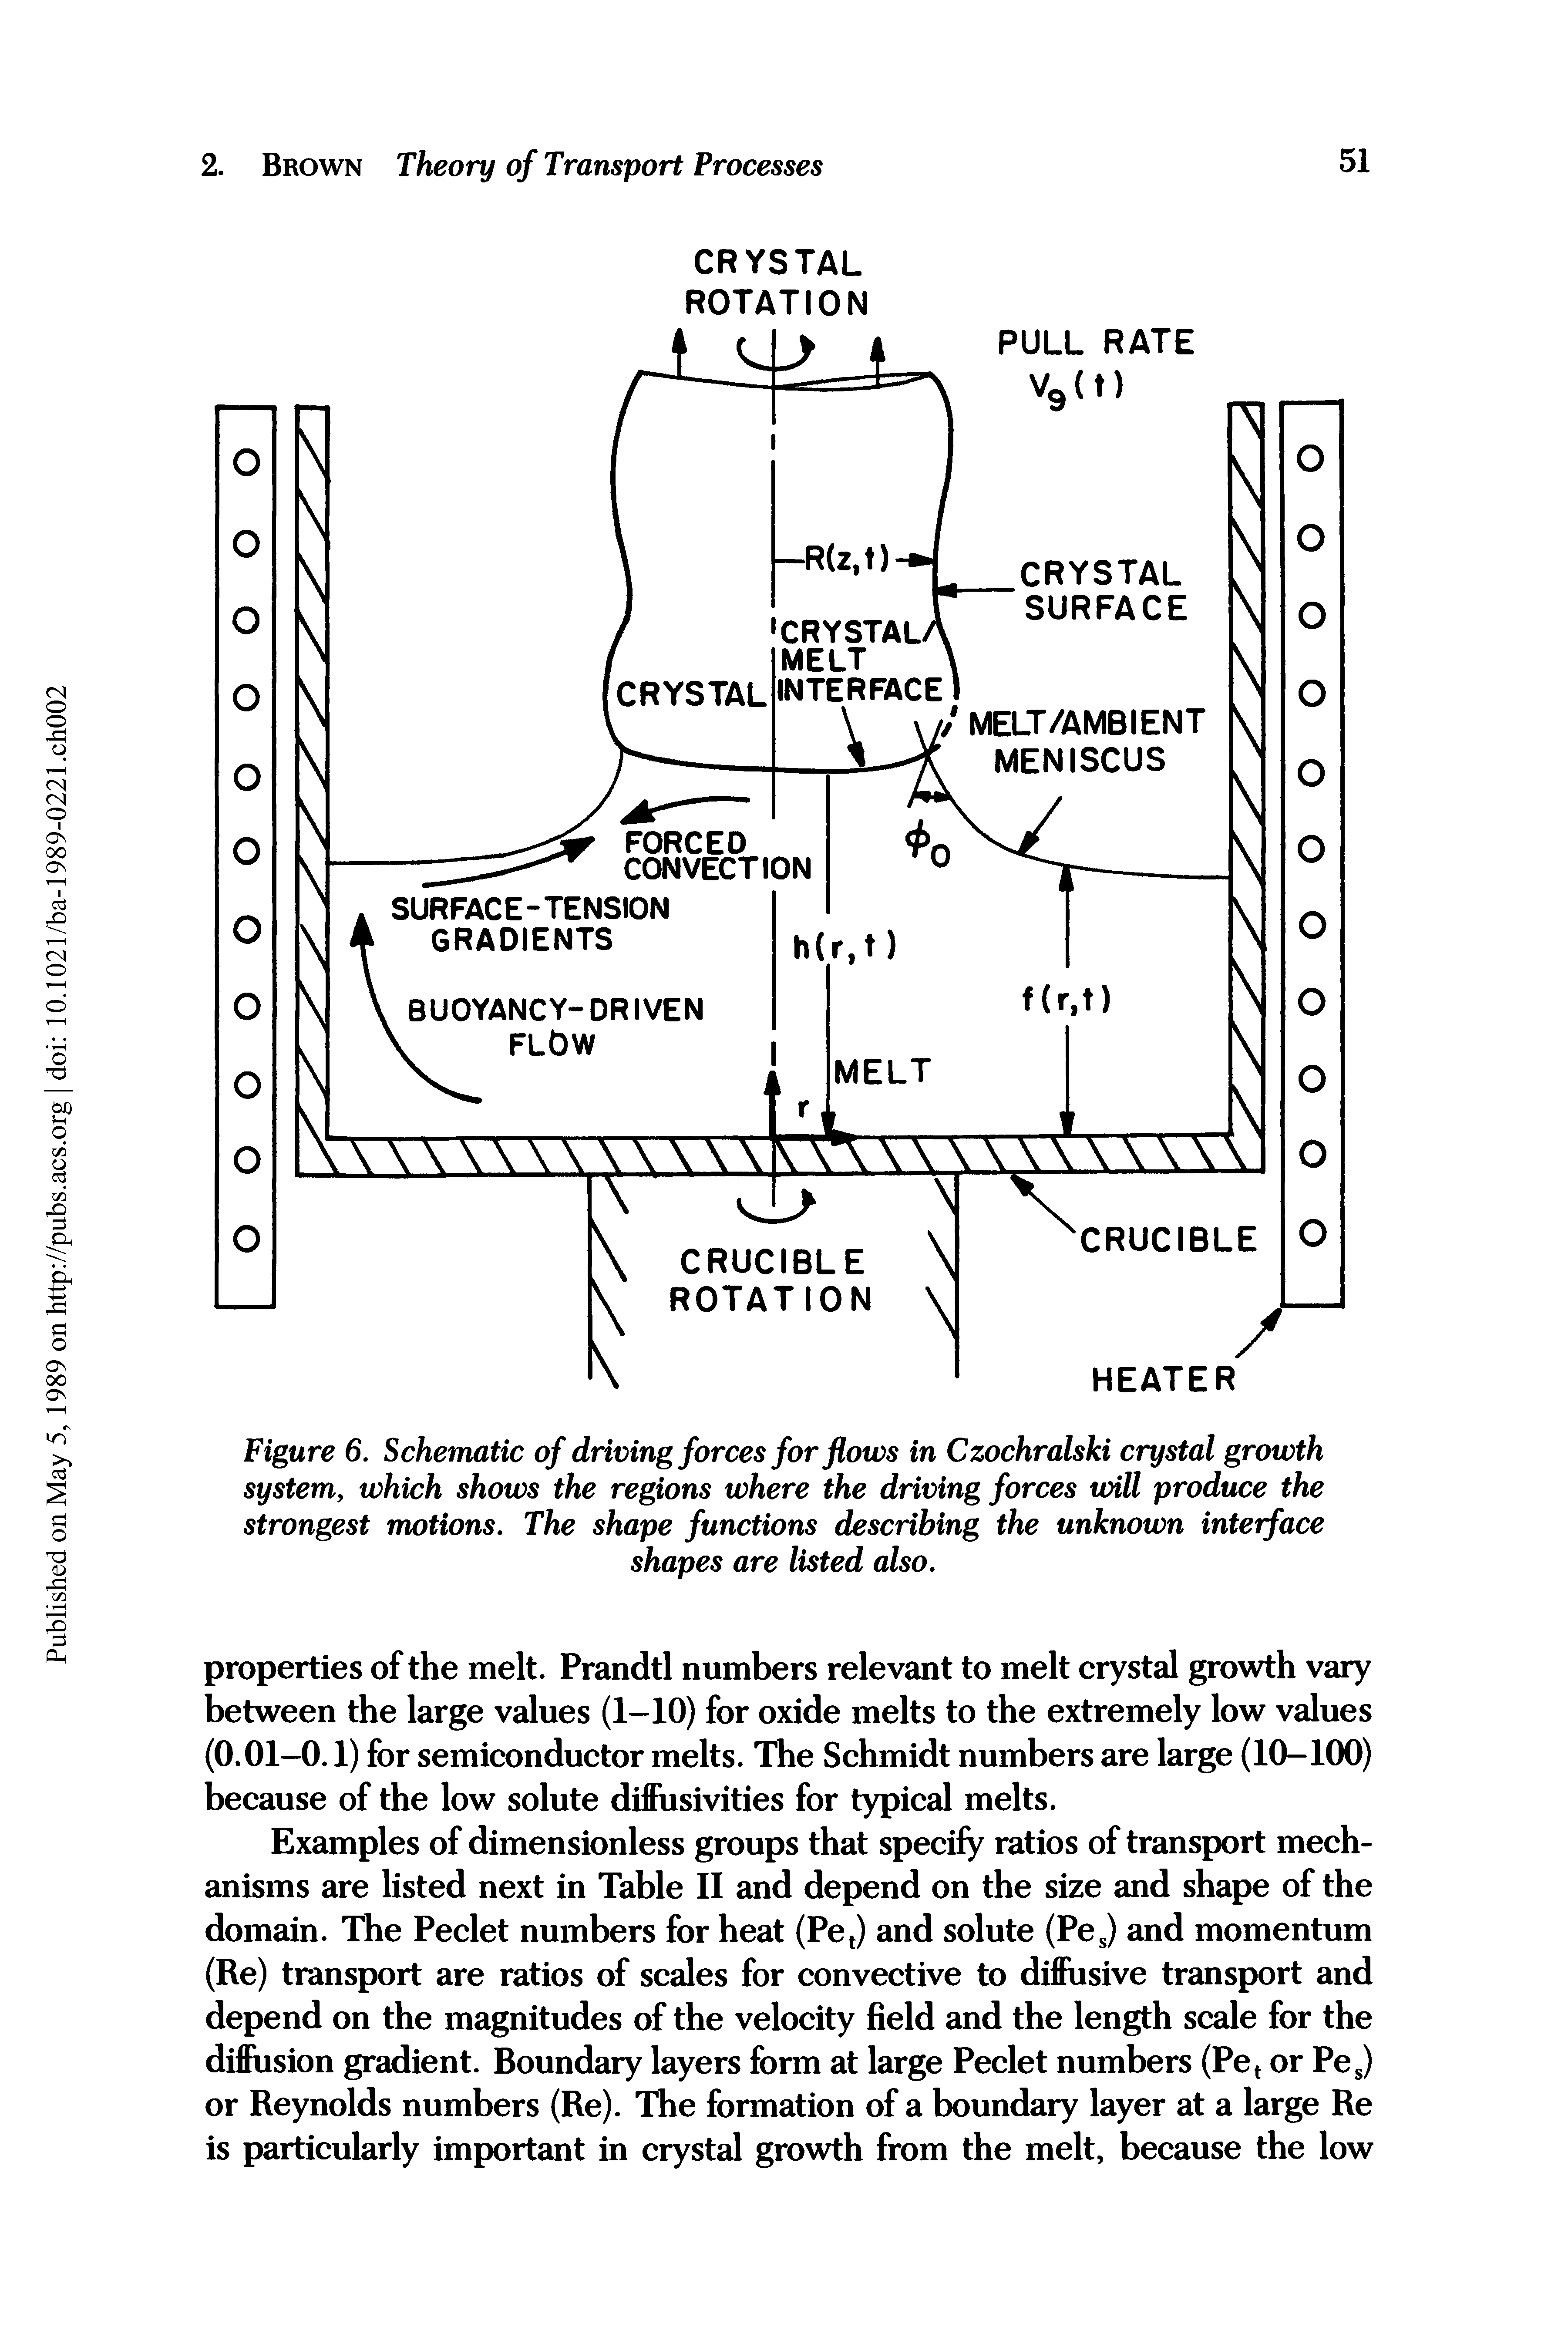 Figure 6. Schematic of driving forces for flows in Czochralski crystal growth system, which shows the regions where the driving forces will produce the strongest motions. The shape functions describing the unknown interface shapes are listed also.